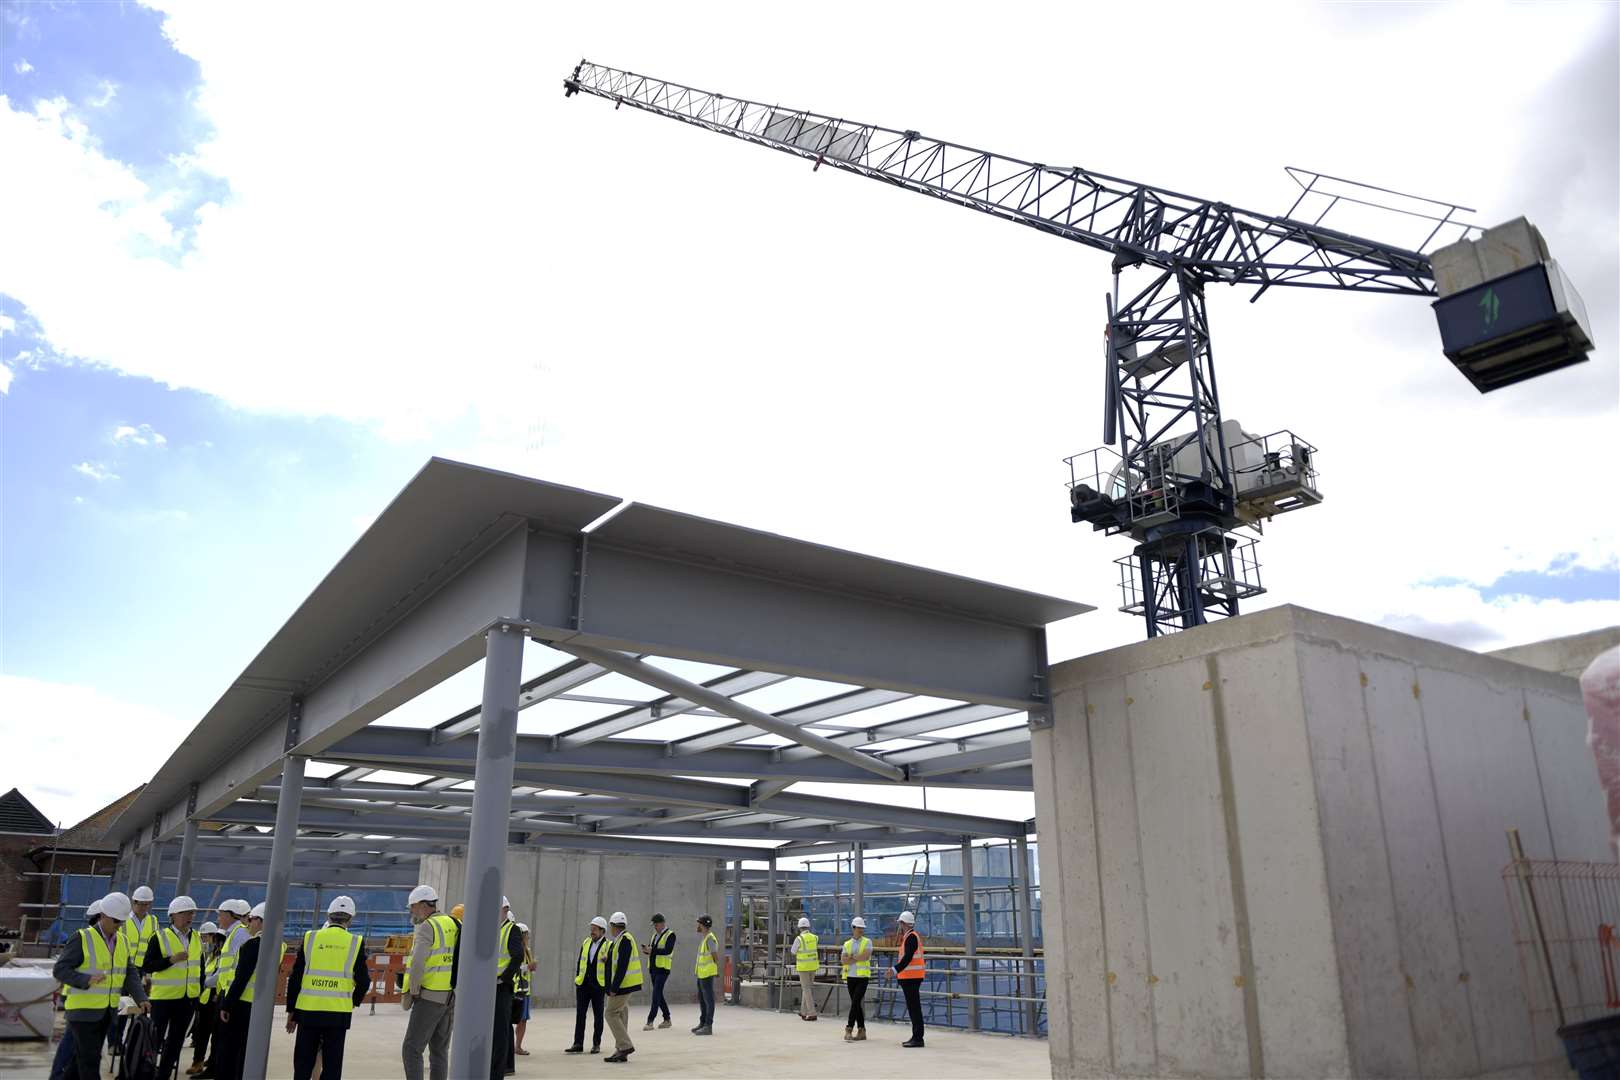 About 25 guests attended Tuesday's topping out ceremony